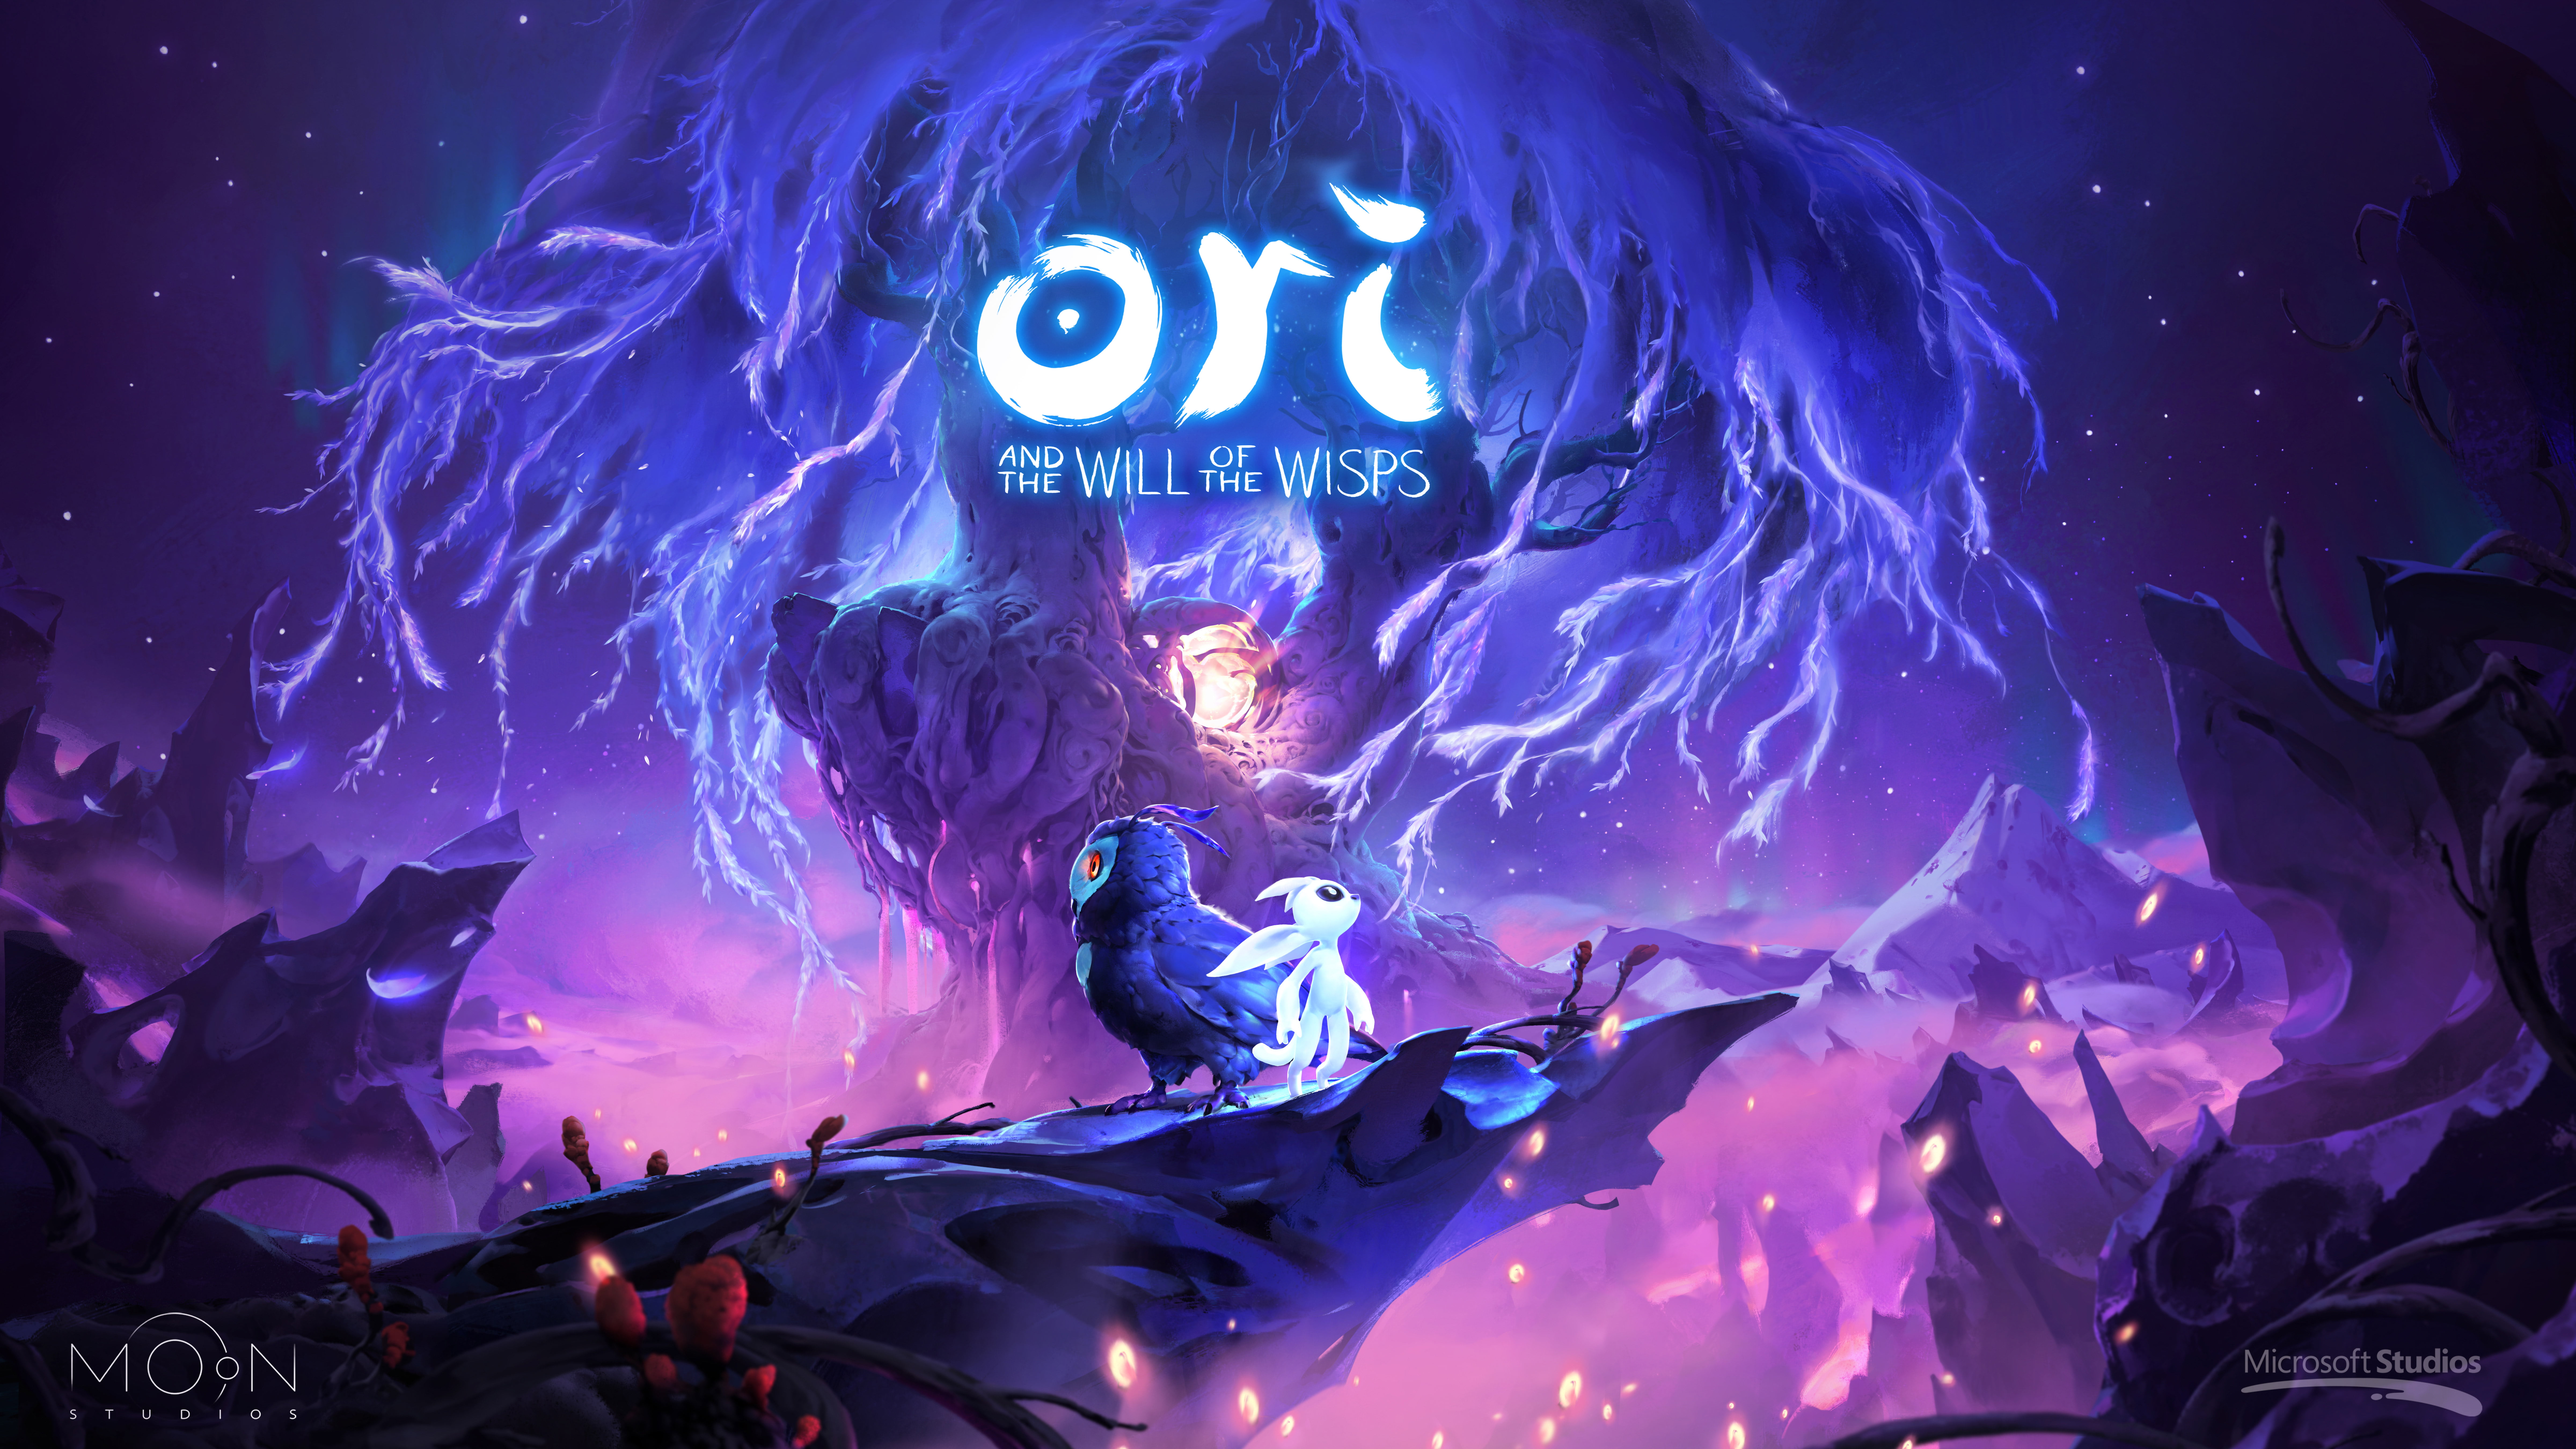 ori and the will of the wisps, 2018 games, hd, 4k, pc games